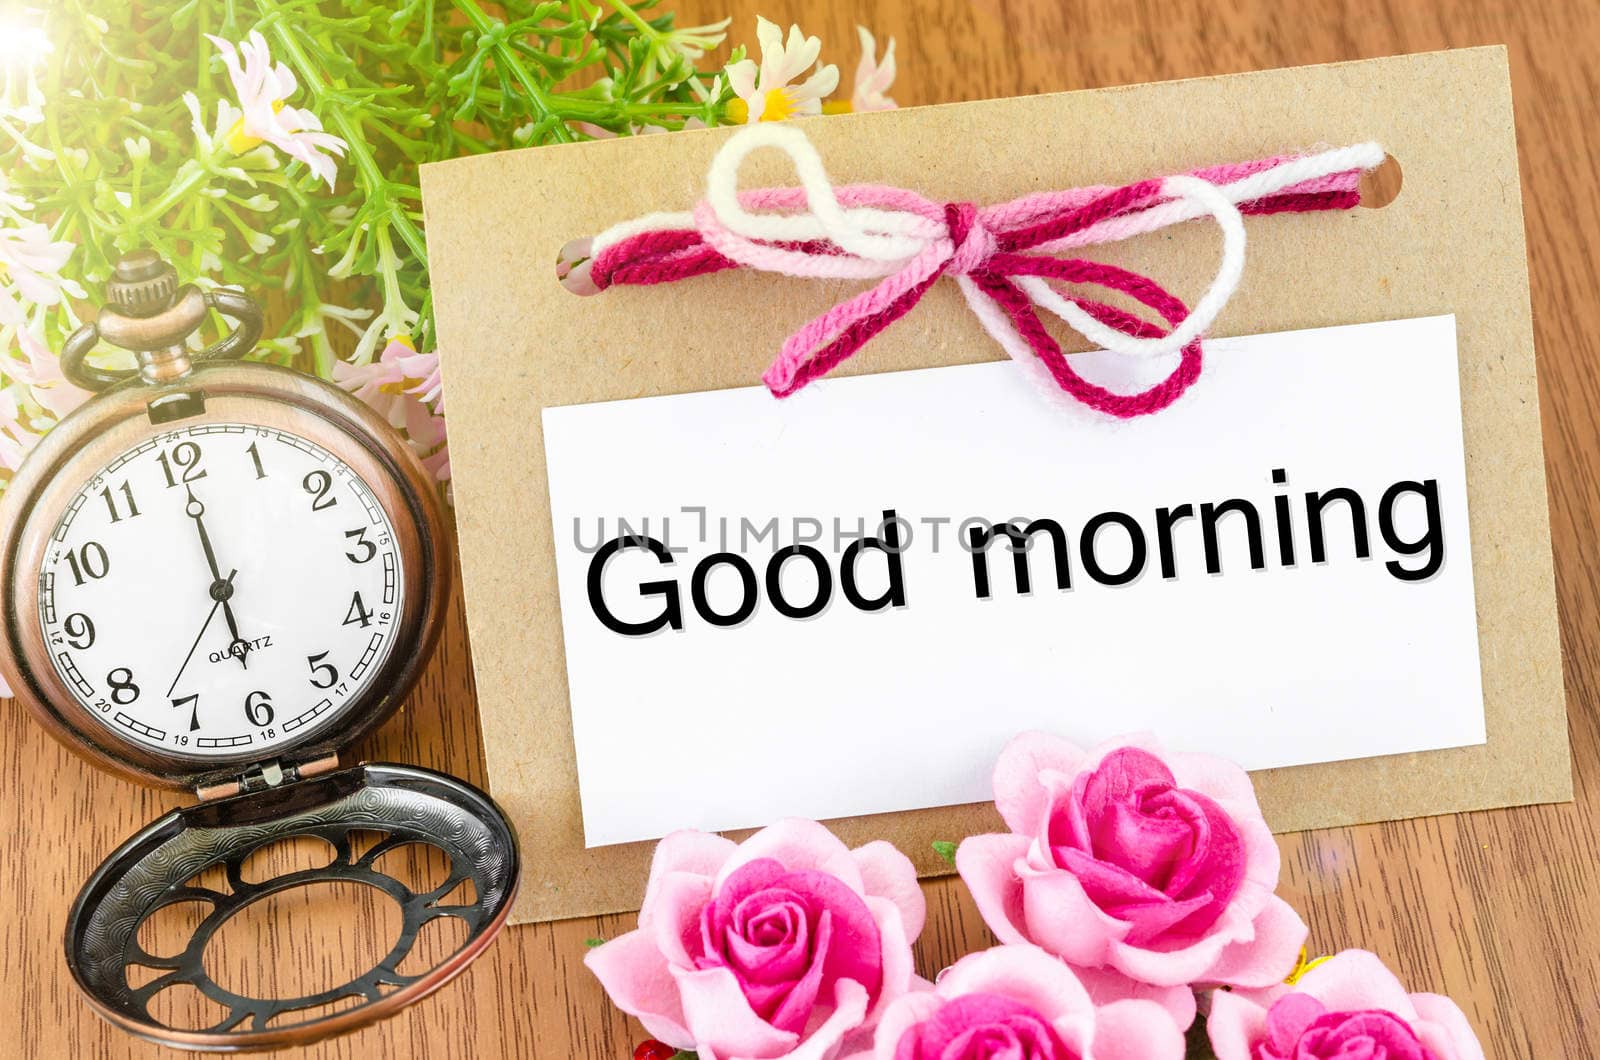 Good morning paper tag by Gamjai